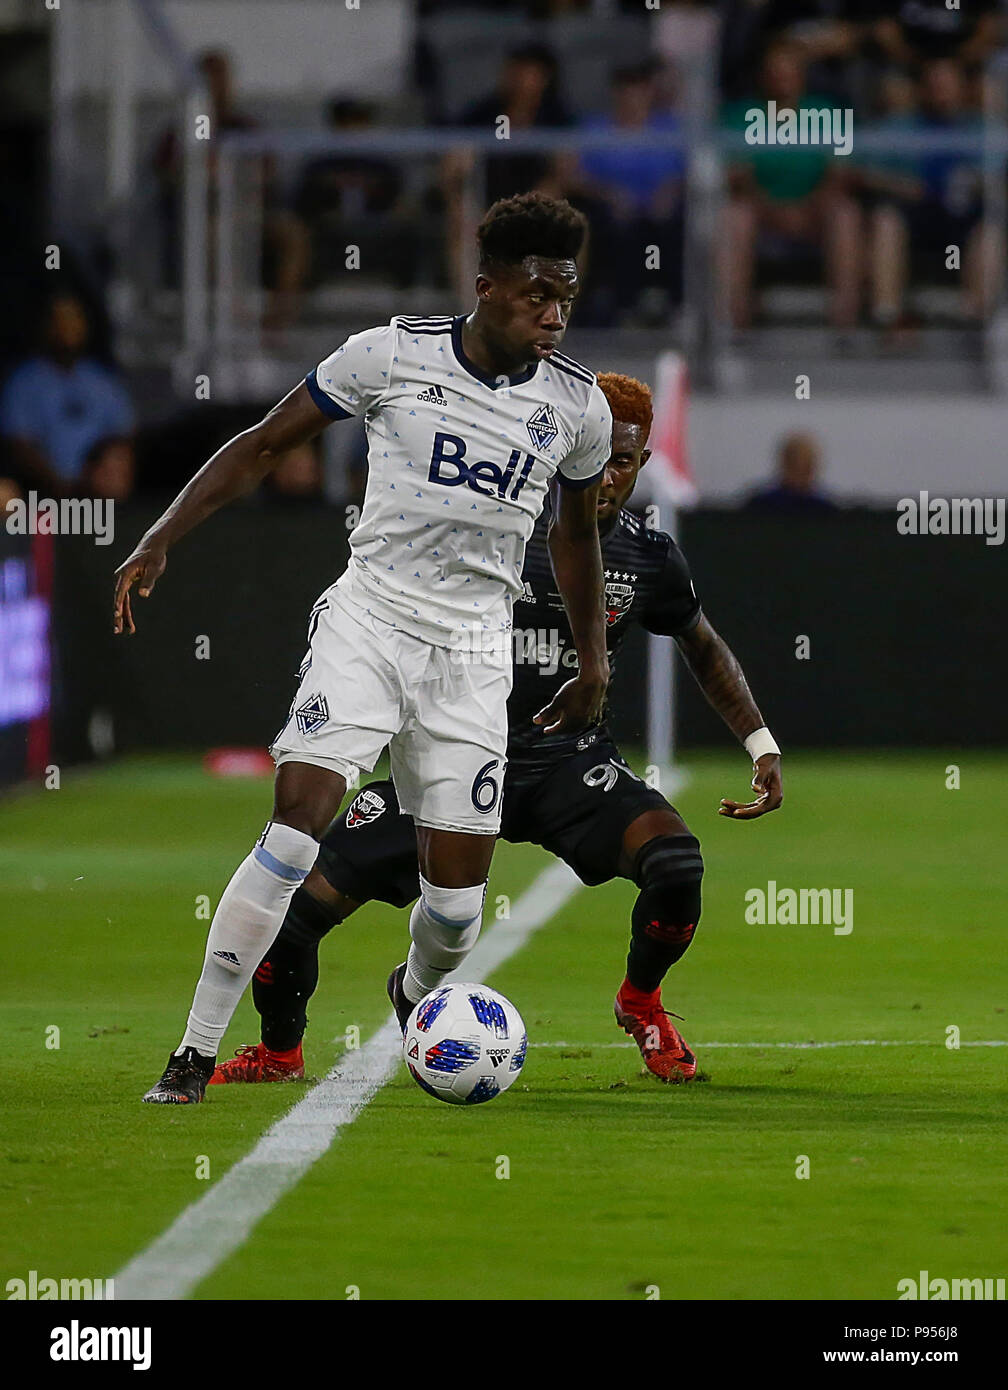 Vancouver, Vancouver. 5th Mar, 2017. Alphonso Davies (R) of Vancouver  Whitecaps vies with Keegan Rosenberry of Philadelphia Union during their  Major League Soccer (MLS) match at BC Place, Vancouver, Canada on March